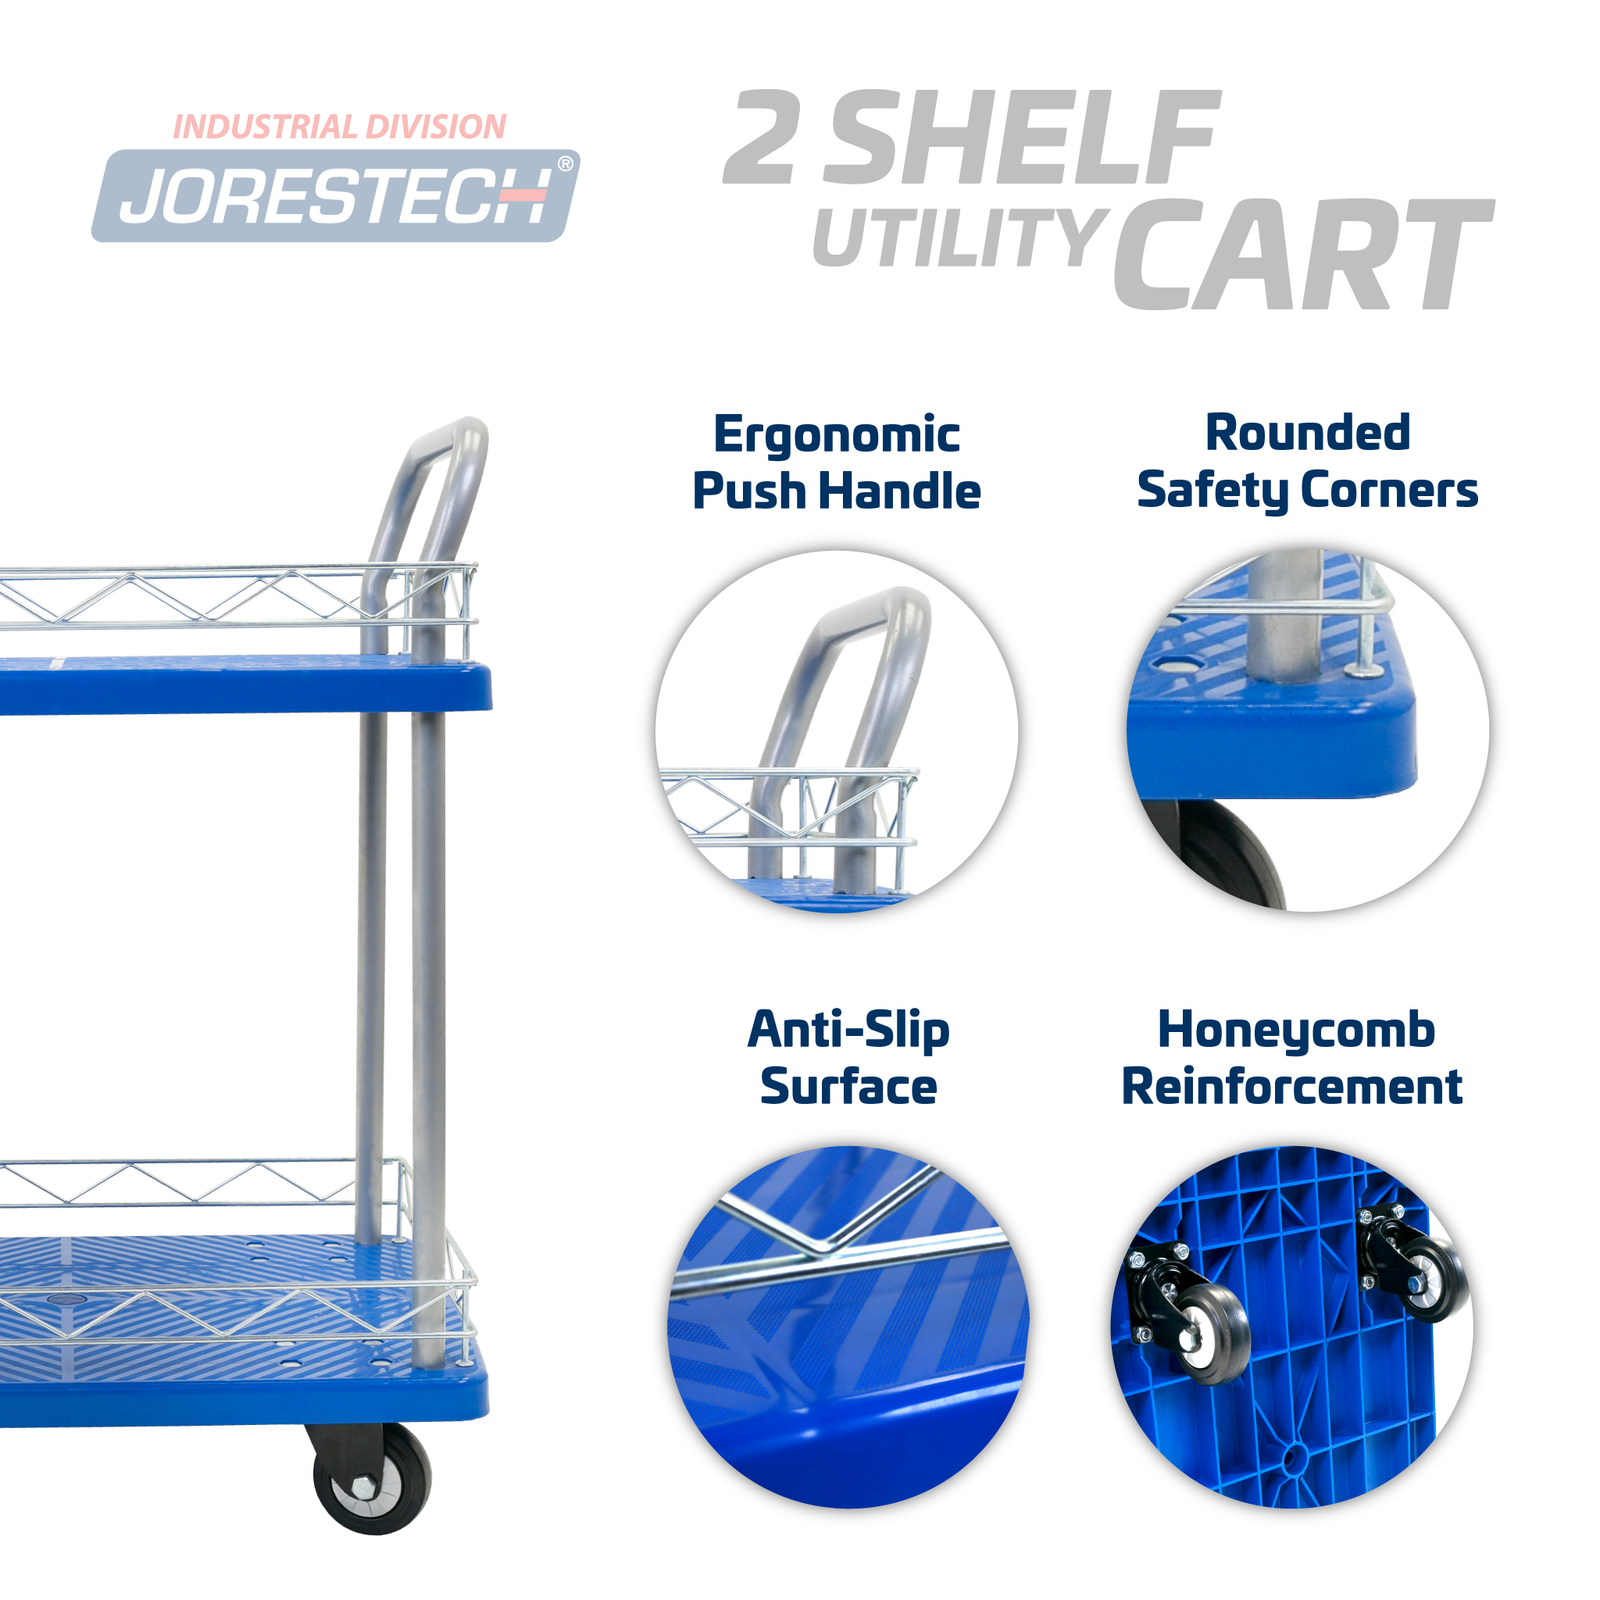 The JORES TECHNOLOGIES® 2 shelf utility push cart and main features include: ergonomic push handle, rounded safety corners, anti-slip surface, honeycomb reinforcement